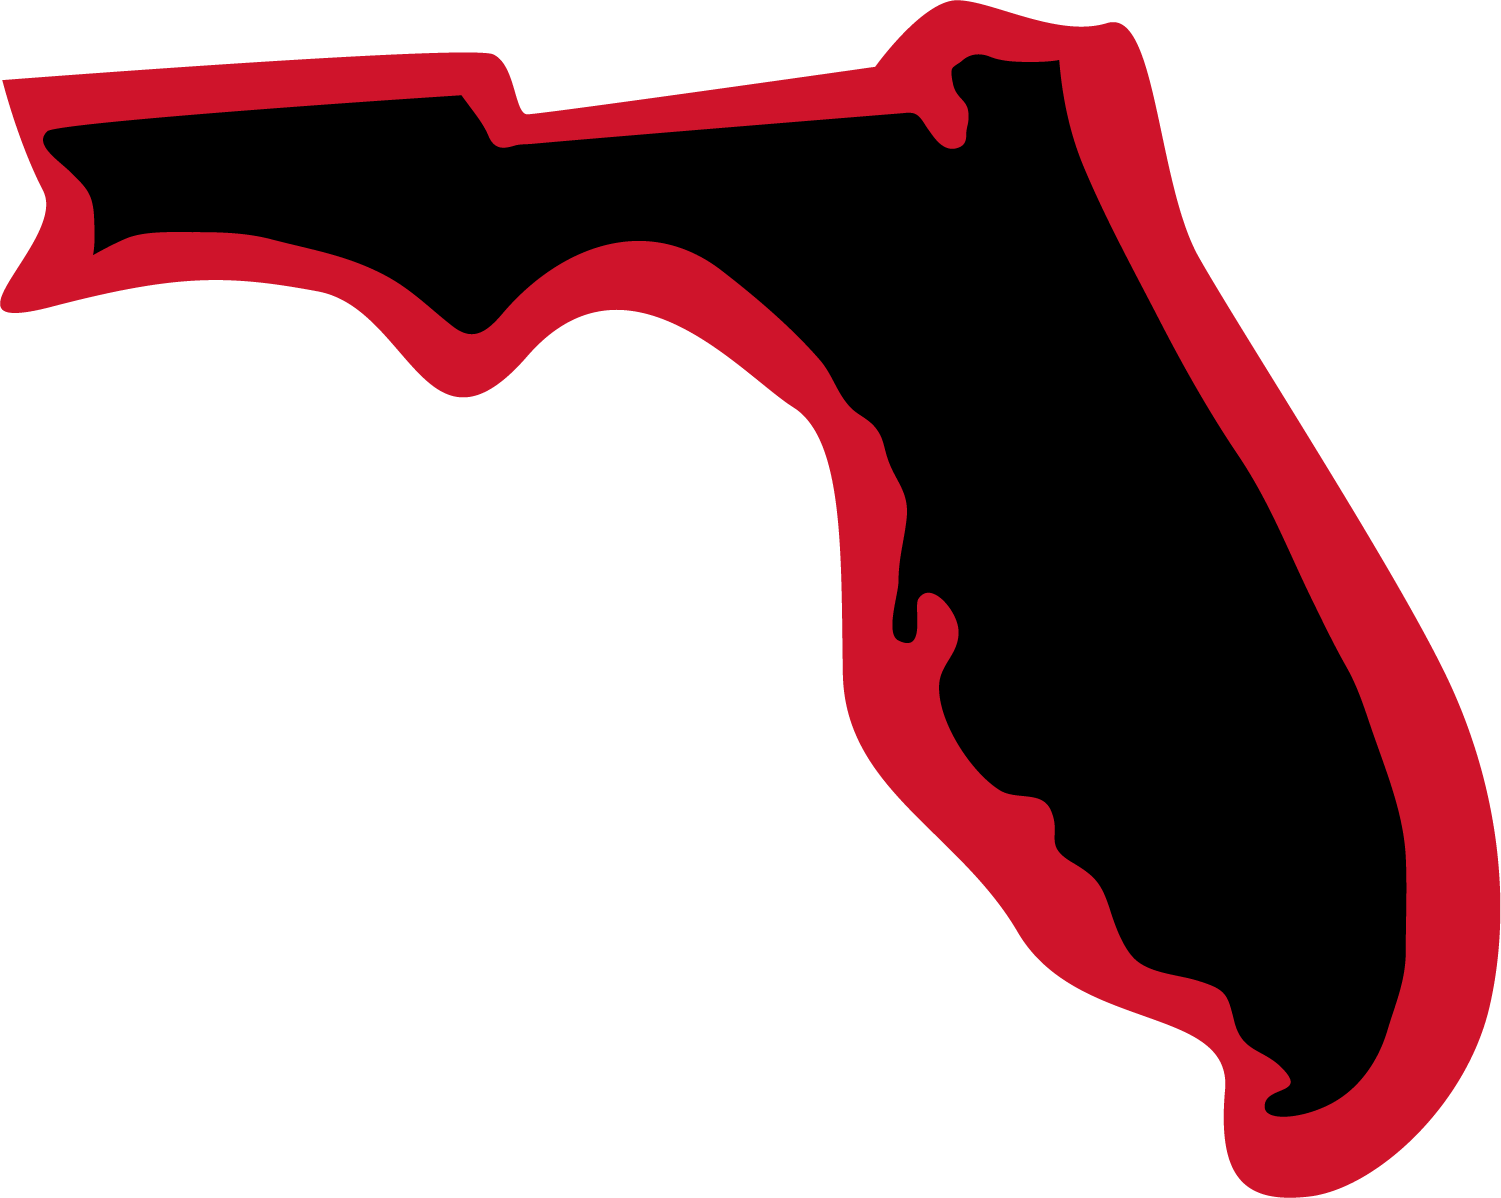 State of Florida outlined in red